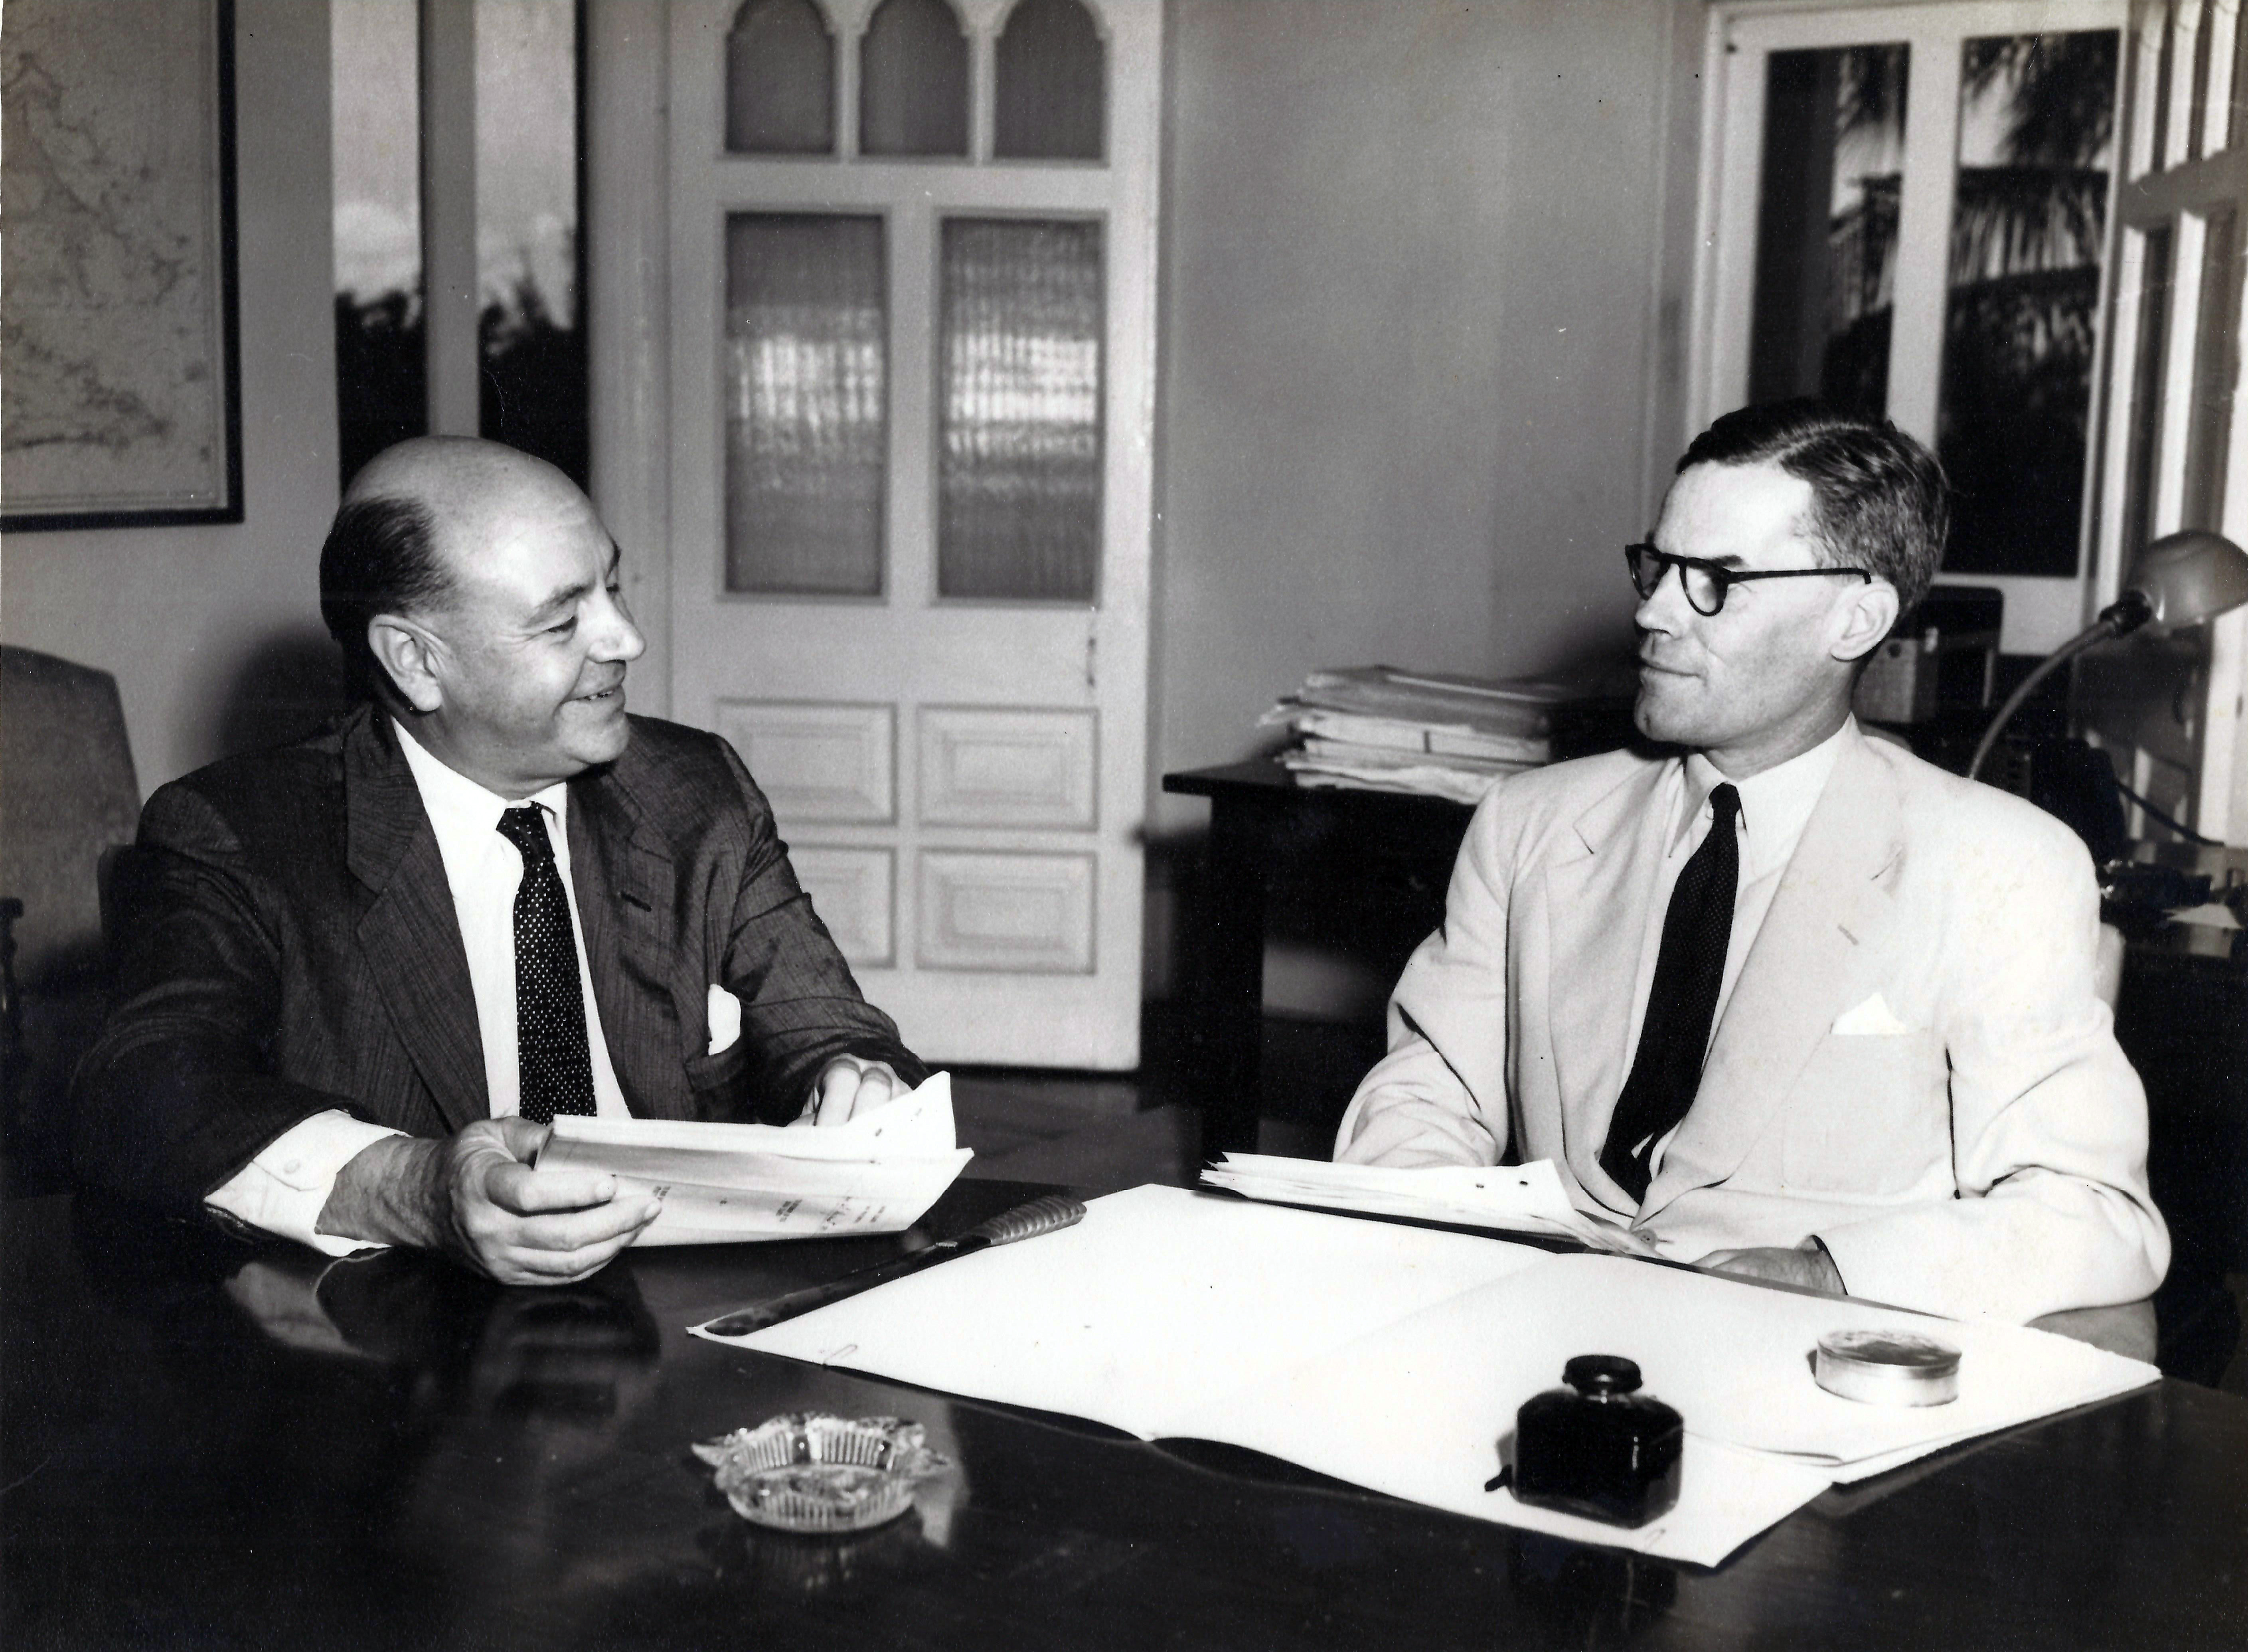 Wallace Groves and acting governor Gardner-Brown signing the Hawksbill Creek Agreement, 1955